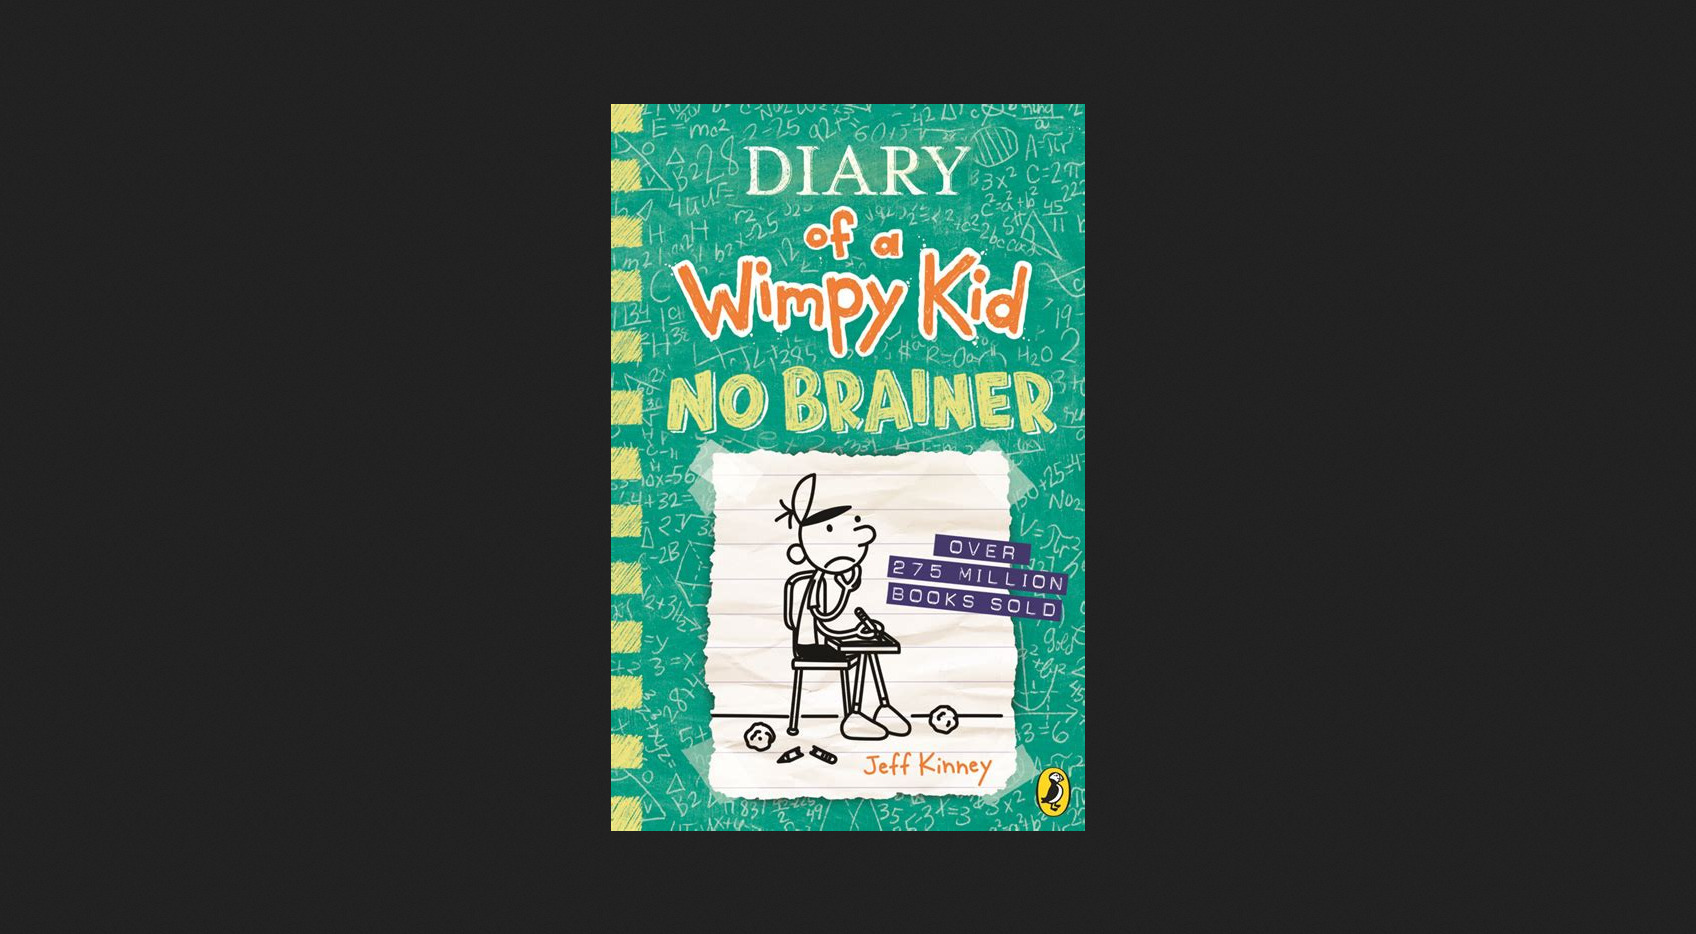 Download [PDF]) No Brainer (Diary of a Wimpy Kid, #18) *eBooks :  morguitainnemedia's Blog